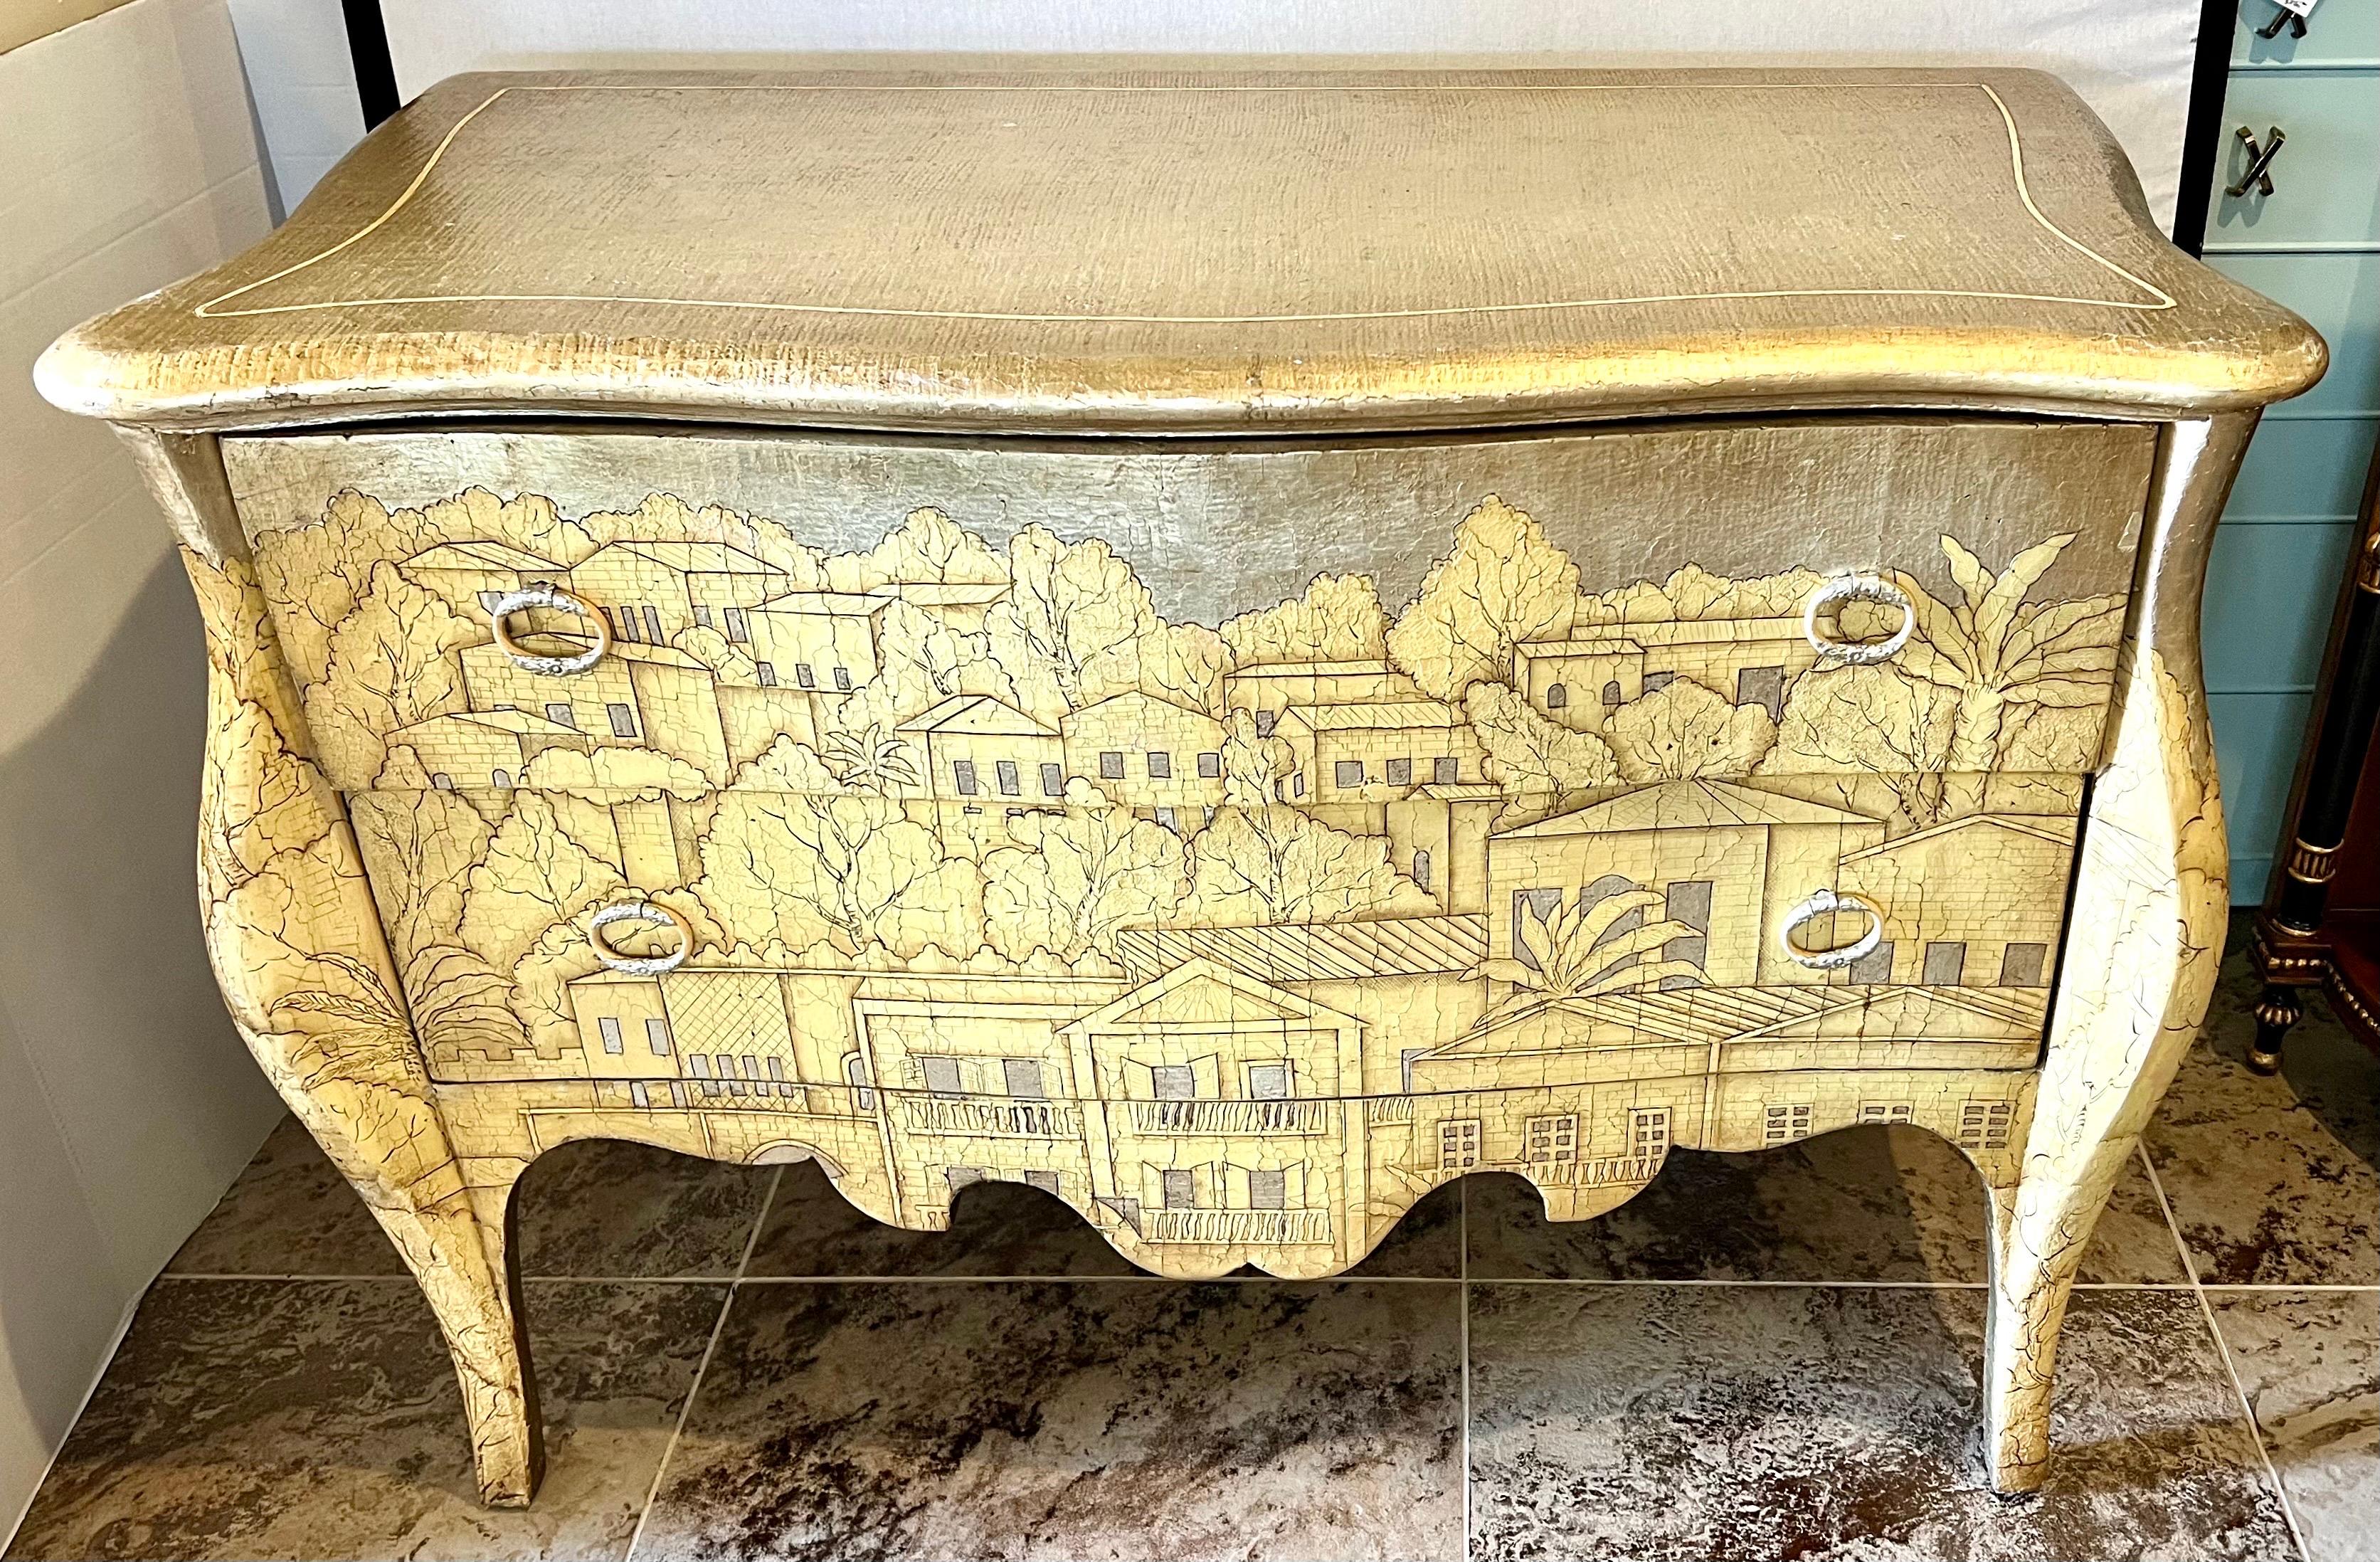 Stunning one-of-a-kind Theodore Alexander bombay chest with two spacious drawers features hand carved landscape of houses on the front and sides. Besides the carvings, what makes this piece so unique is the color and silver leaf finish. Even the